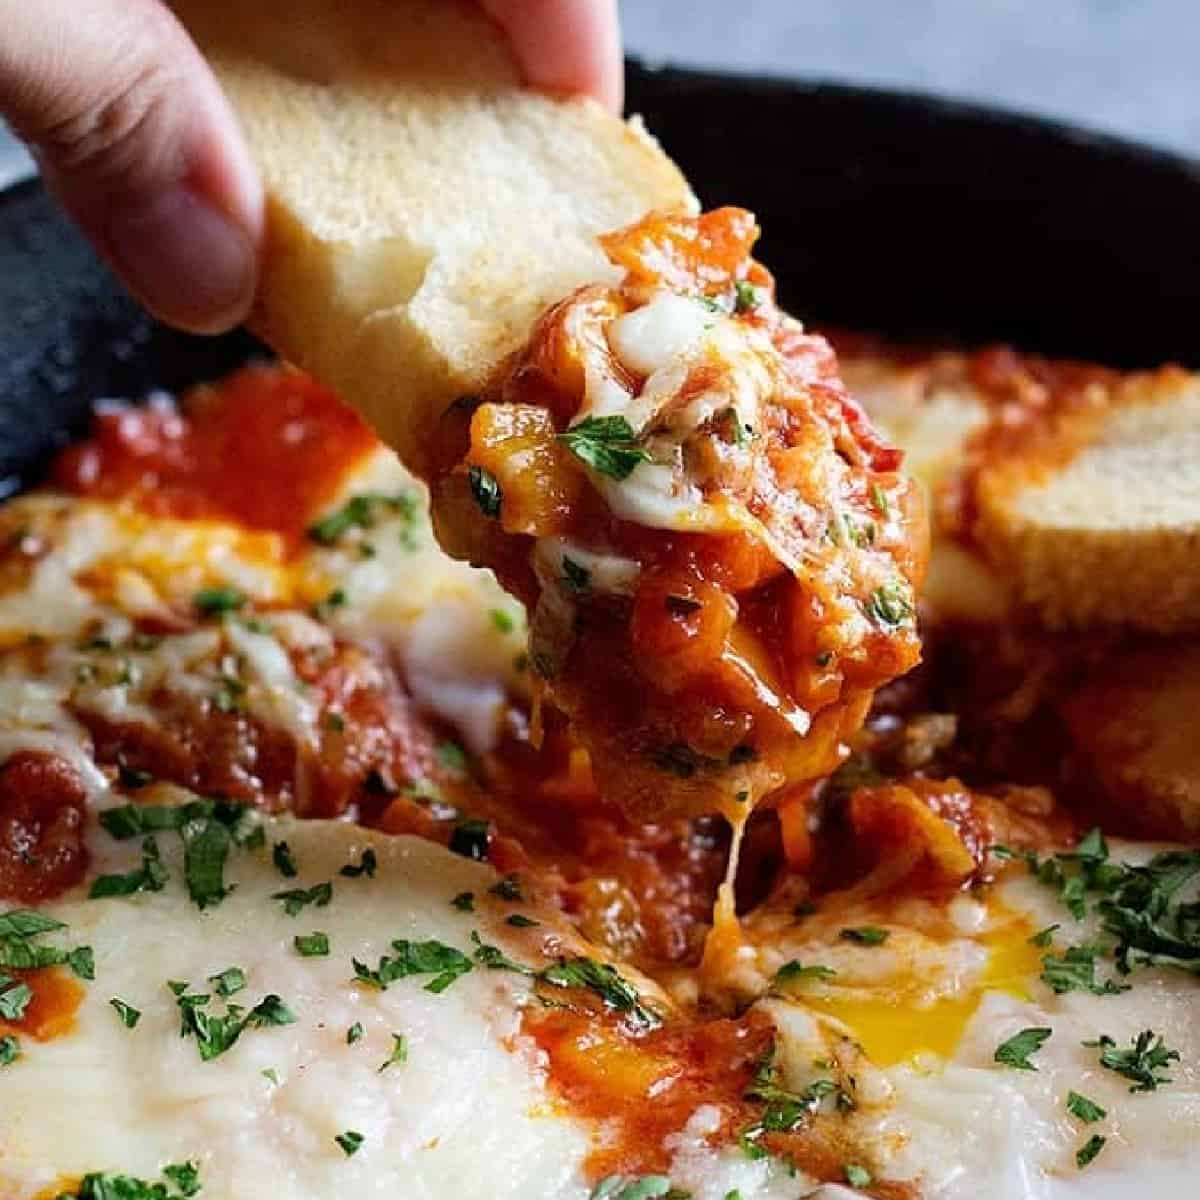 Italian baked eggs are great for the weekends. This breakfast egg recipe is delicious and is cooked in the most amazing tomato sauce.
